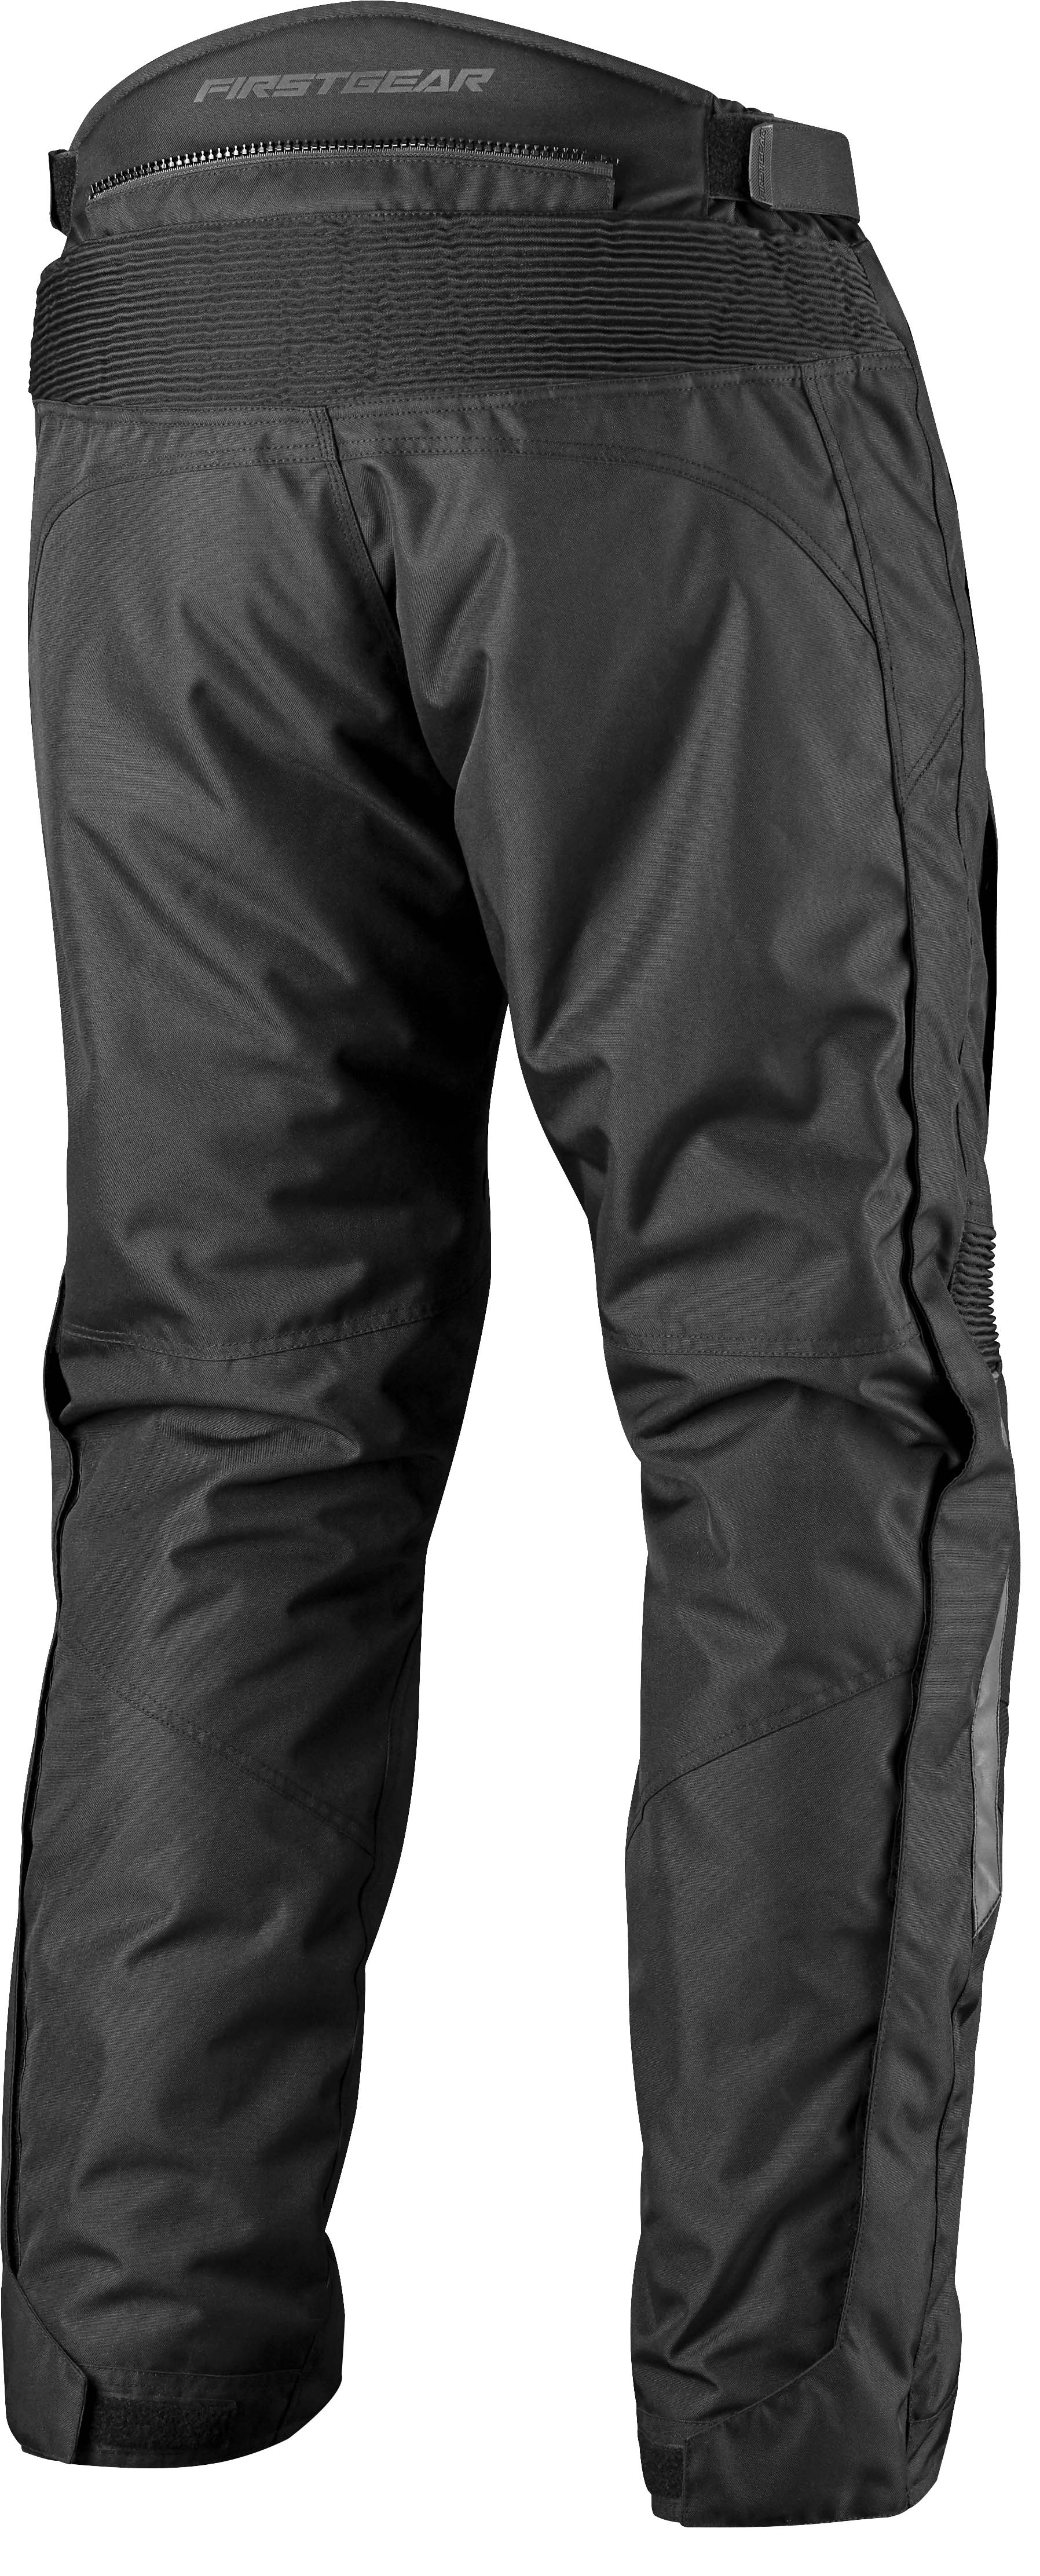 JAUNT OVERPANT | Pants And Suits | Premium Motorcycle Clothing & Gear ...